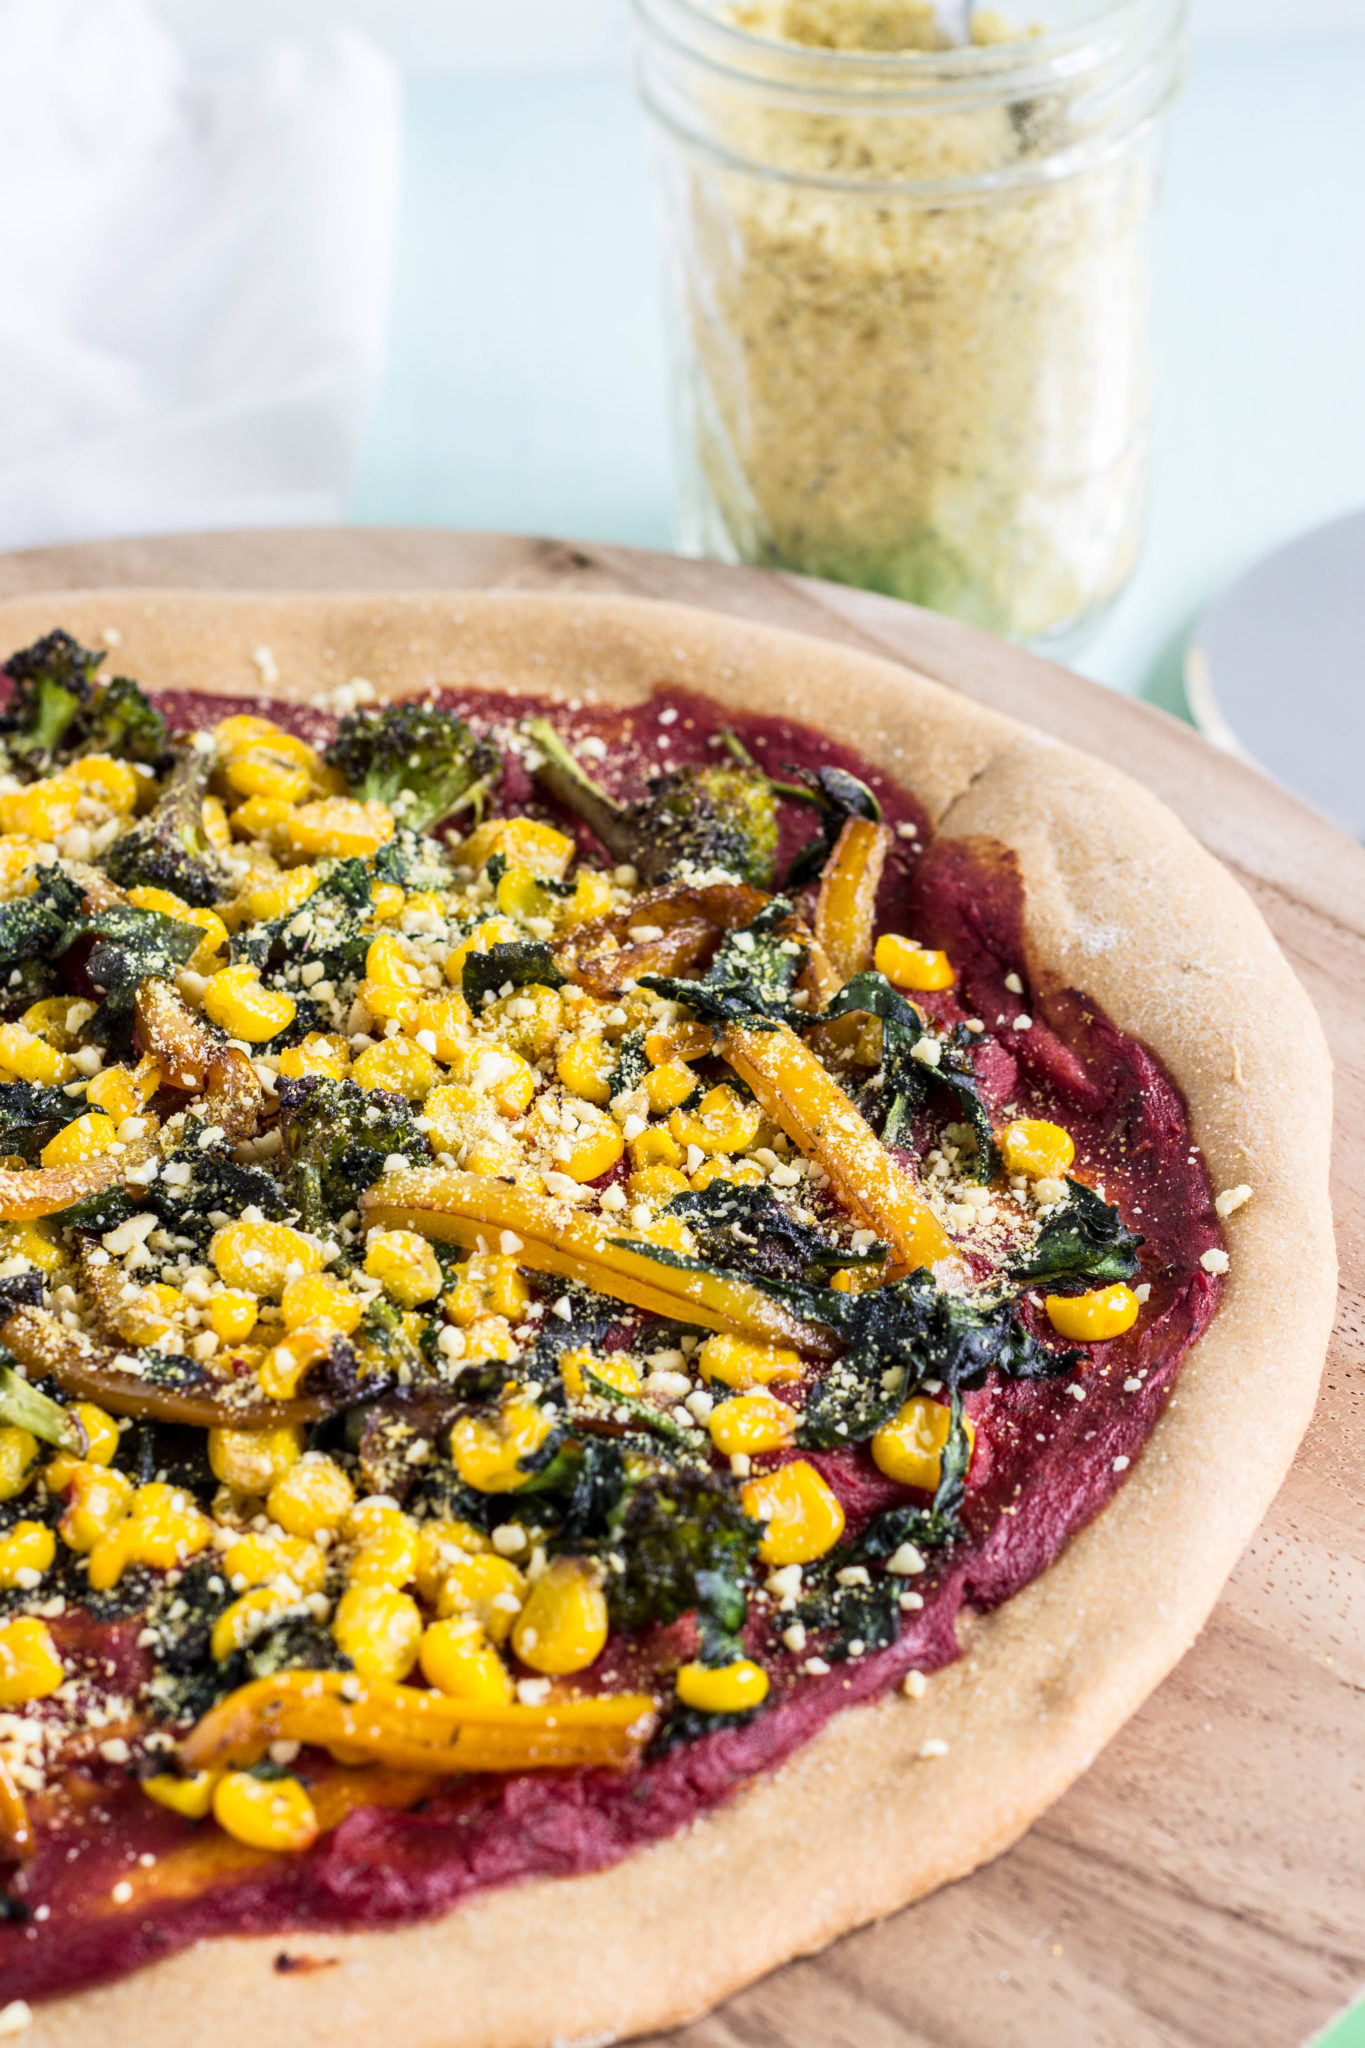 Whole Wheat Yeast Free Pizza Crust - Dinners for Veganuary 